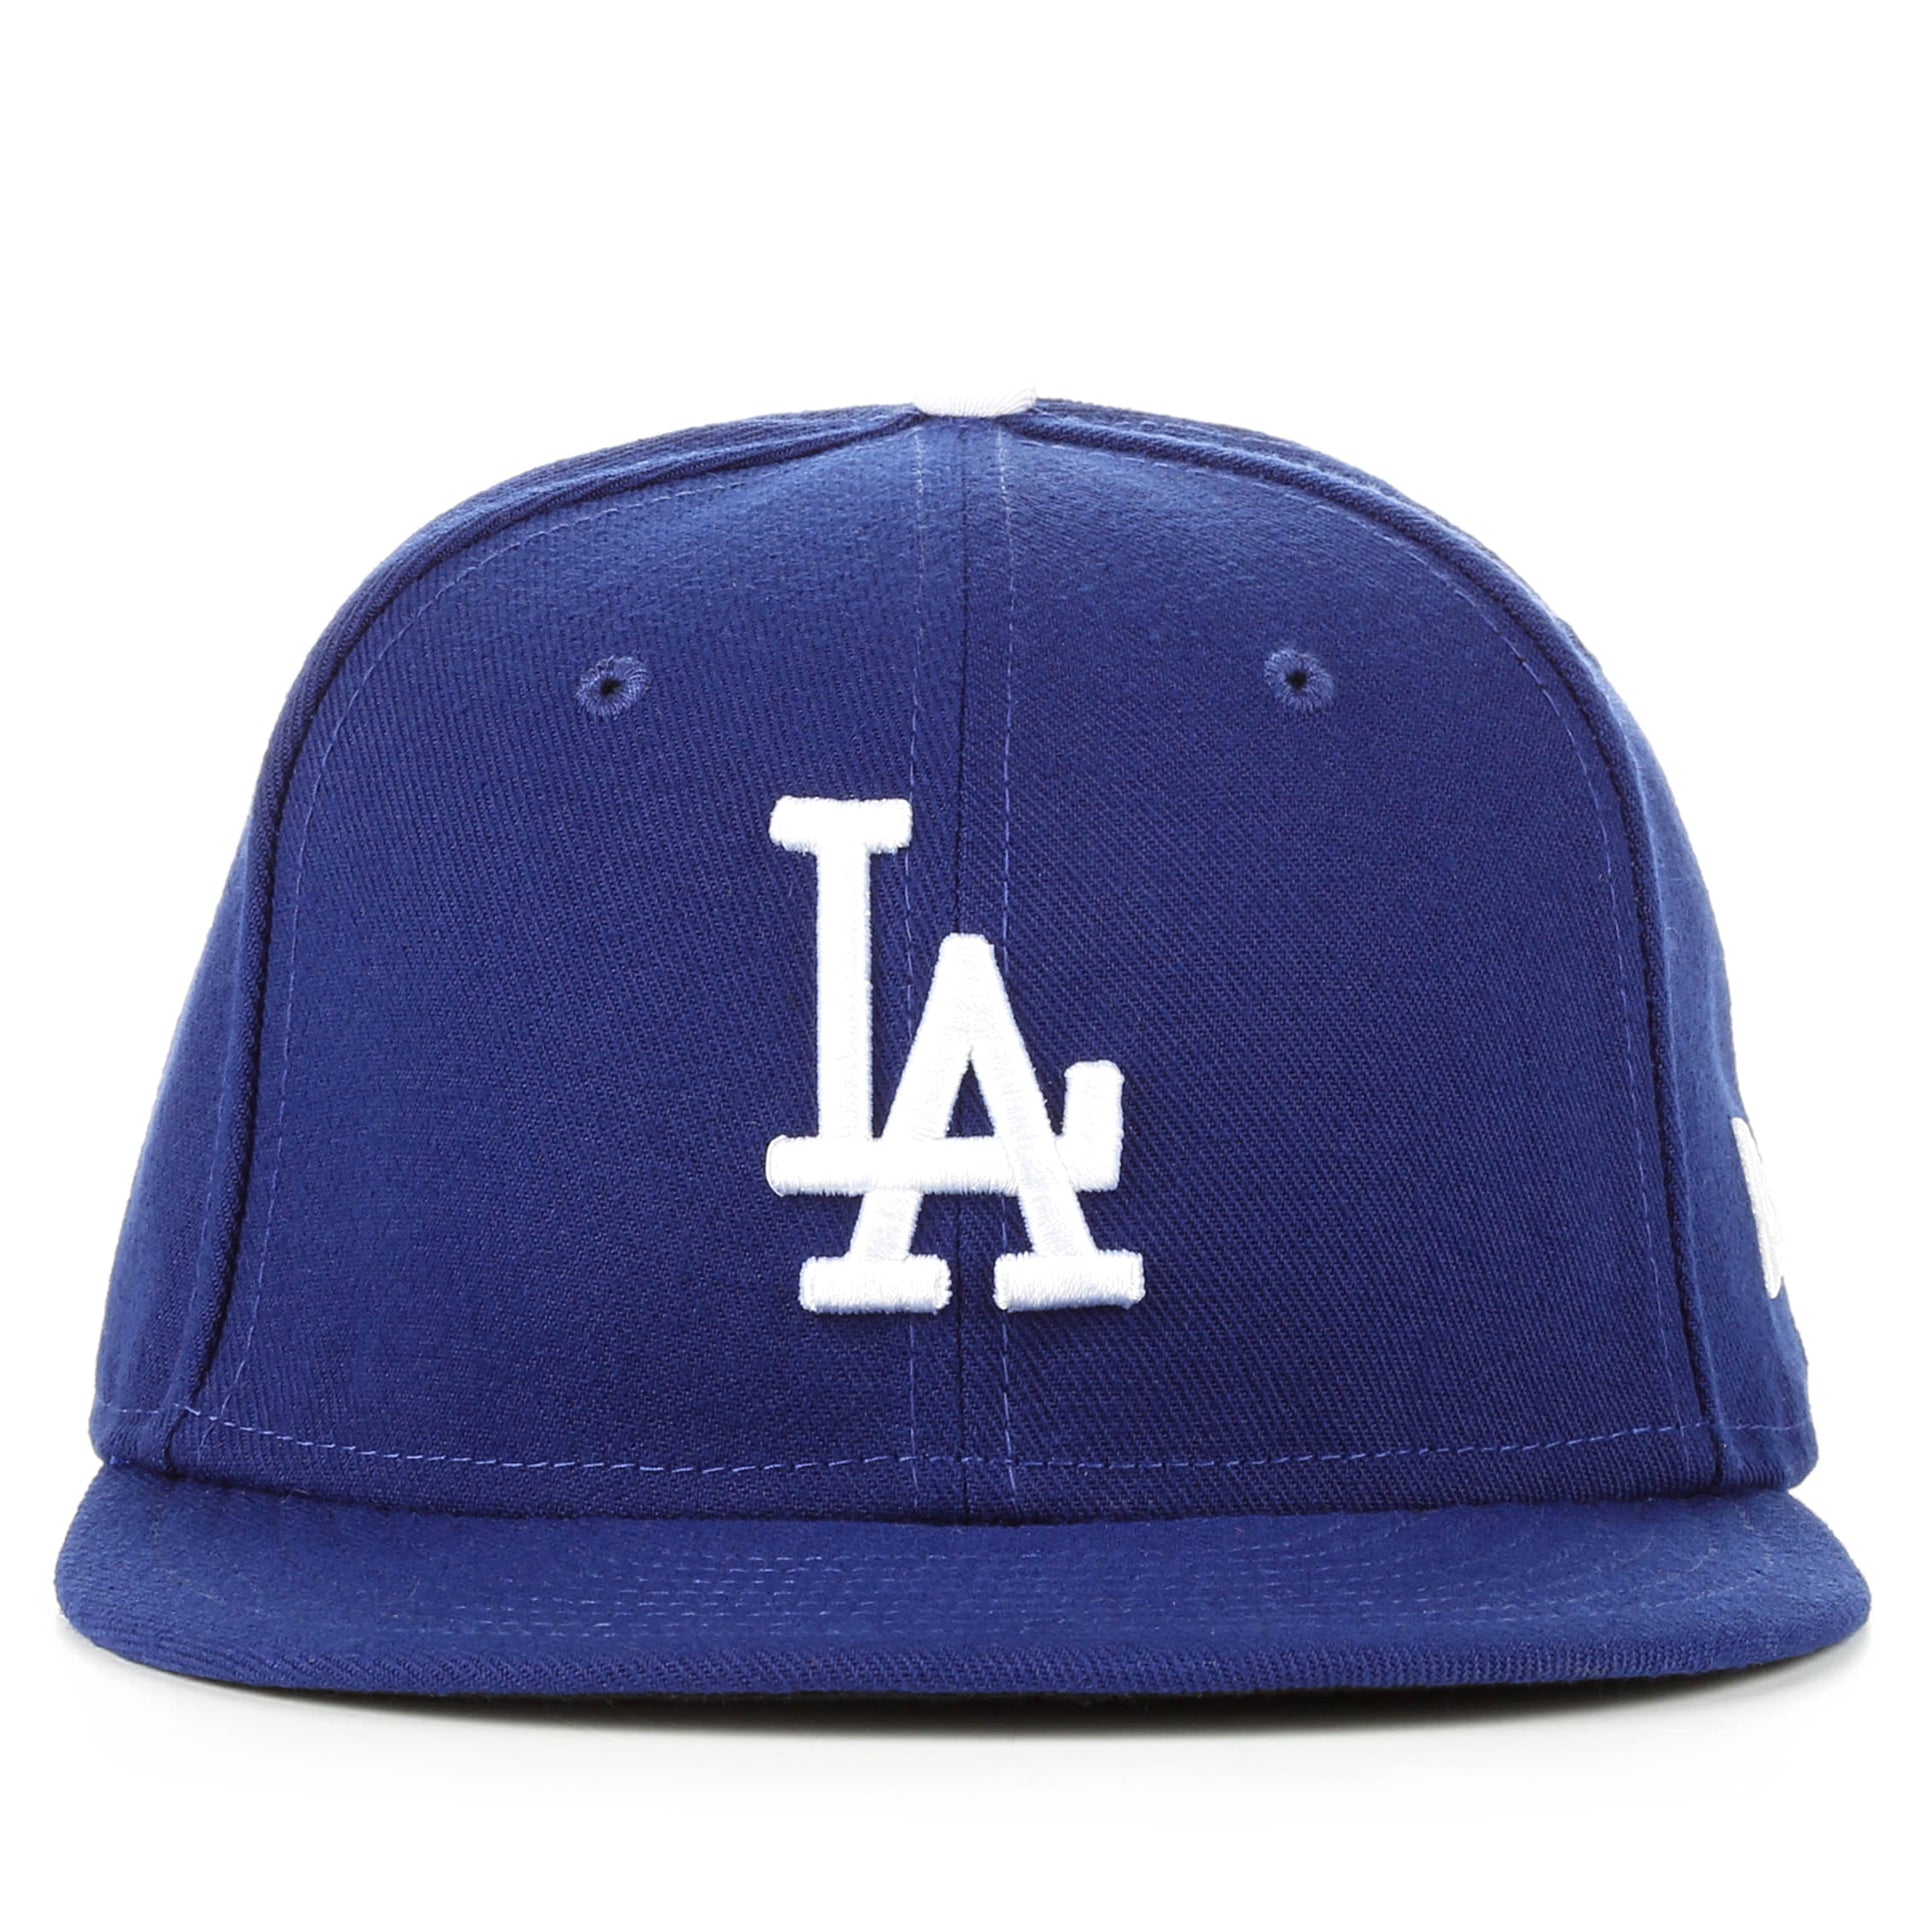 New Era 59Fifty AC Performance Fitted Cap - Los Angeles Dodgers